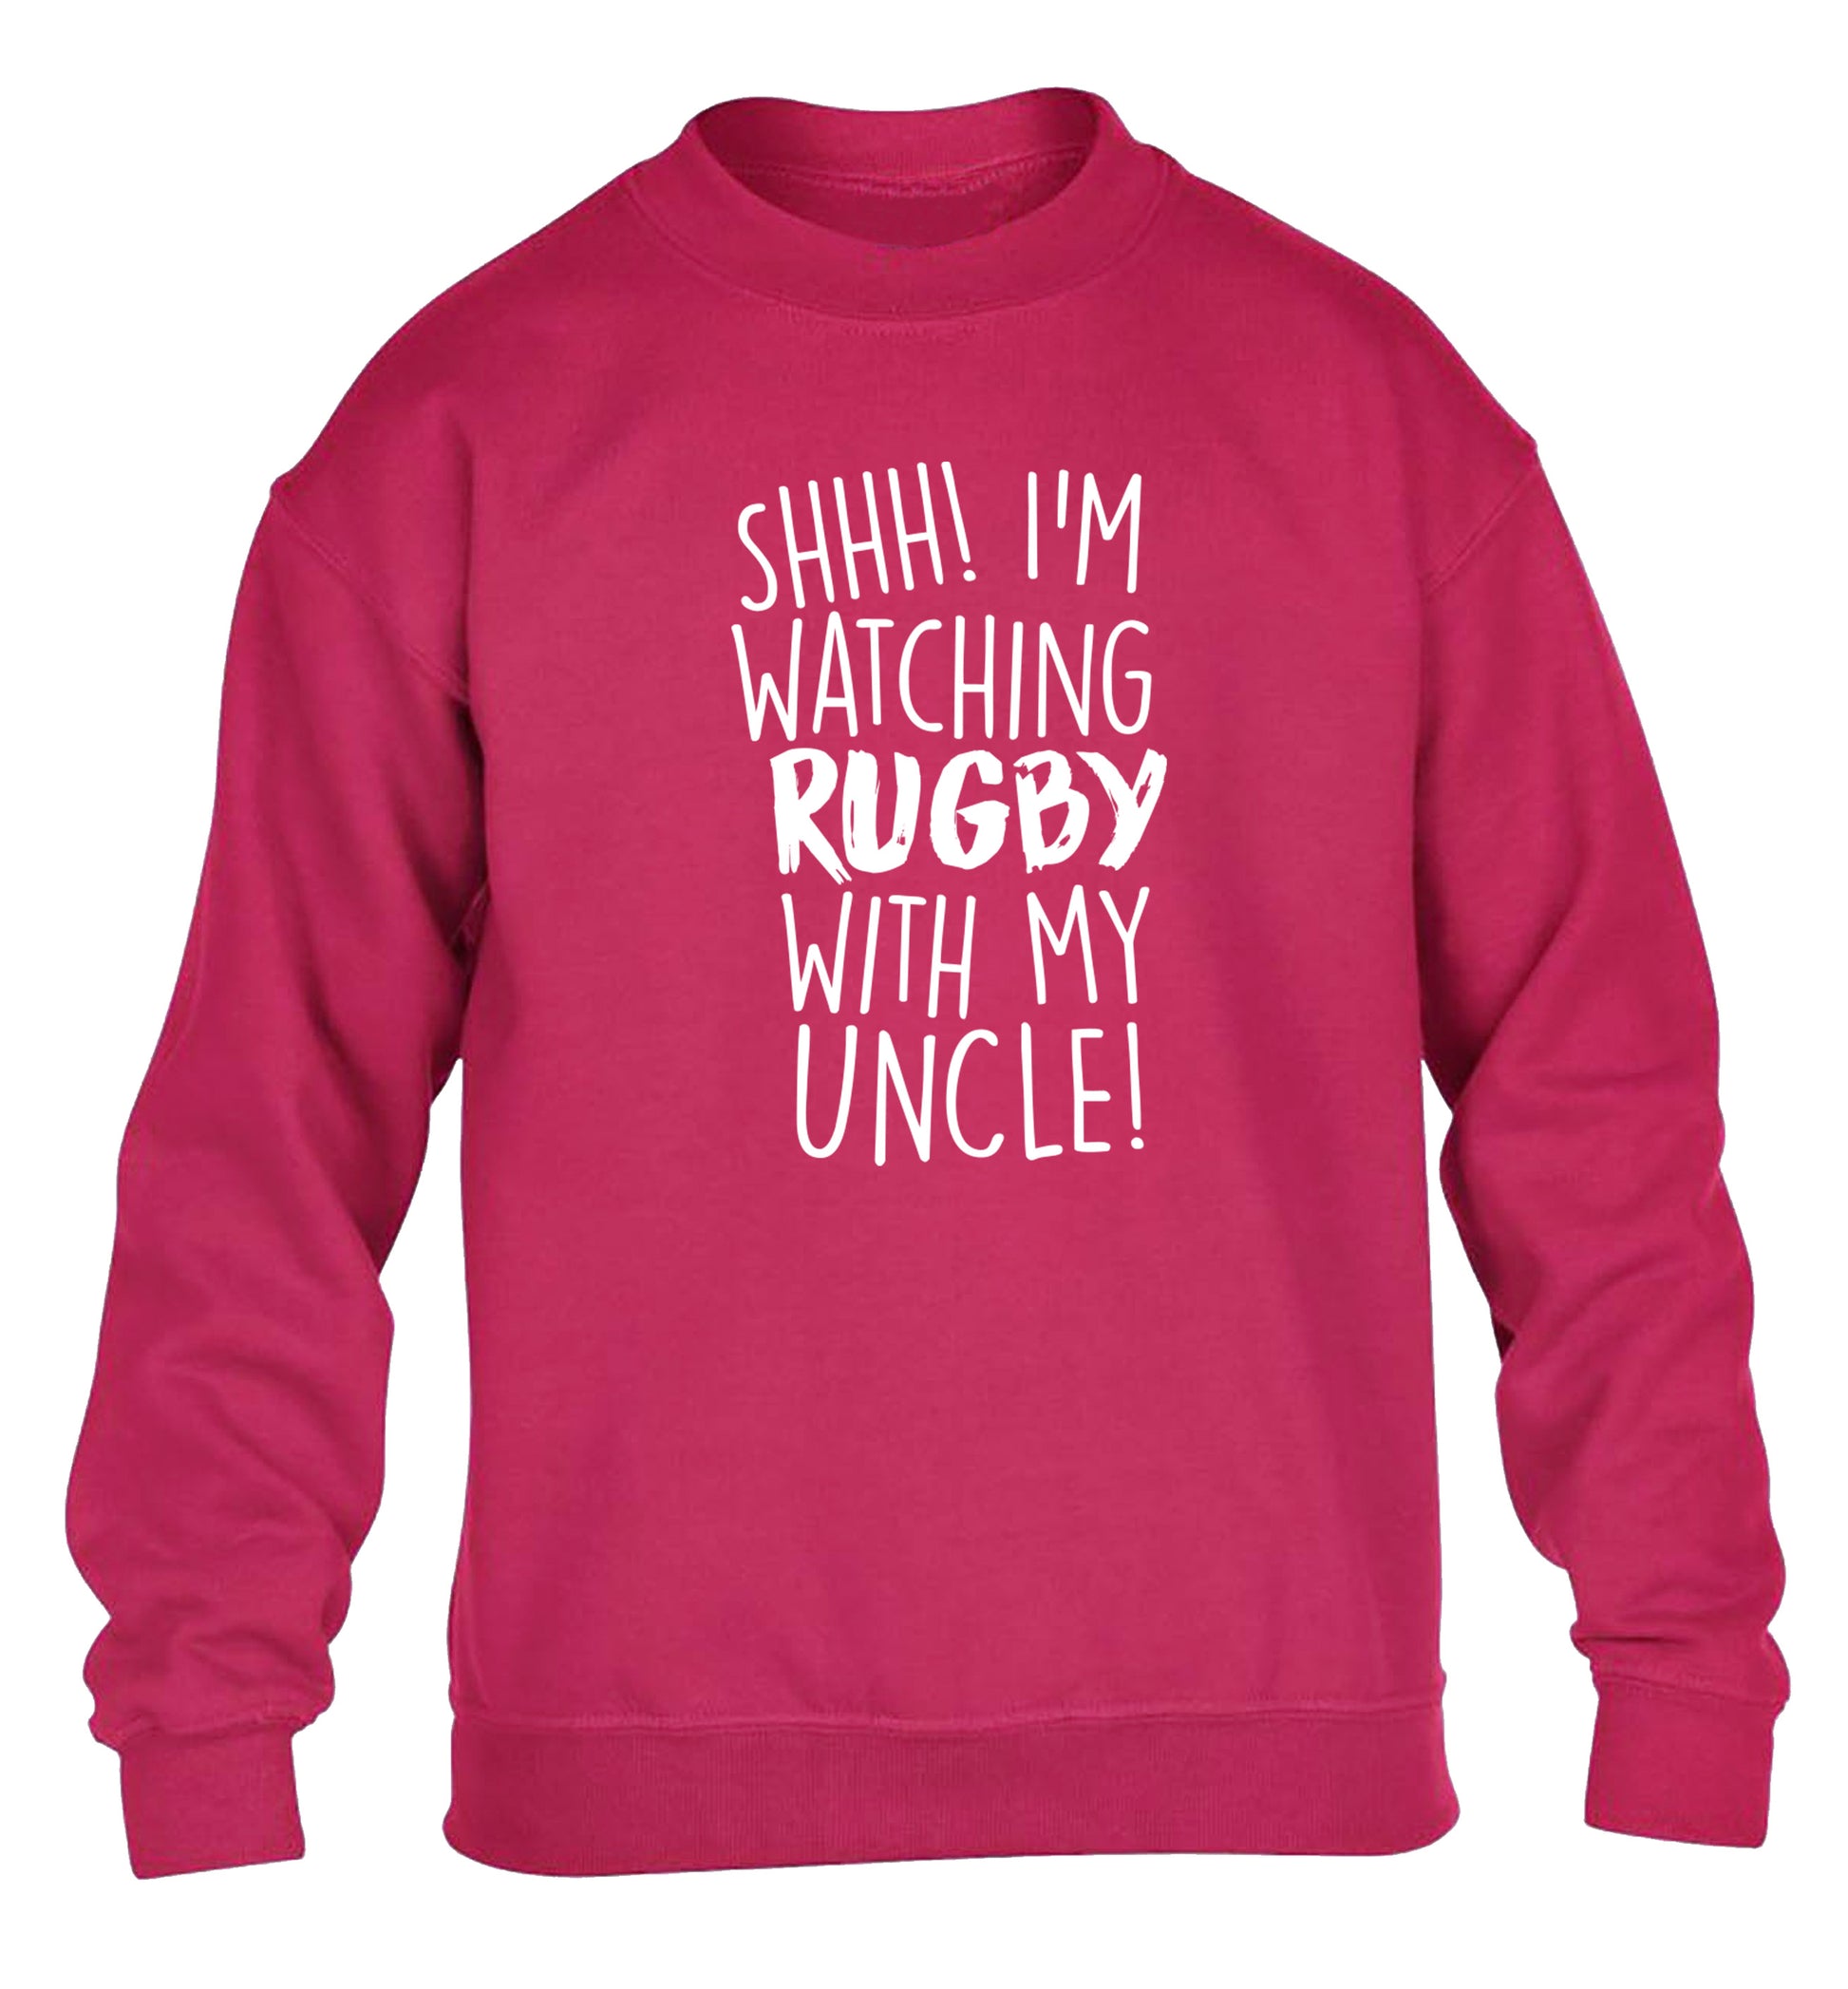 Shh.. I'm watching rugby with my uncle children's pink sweater 12-13 Years